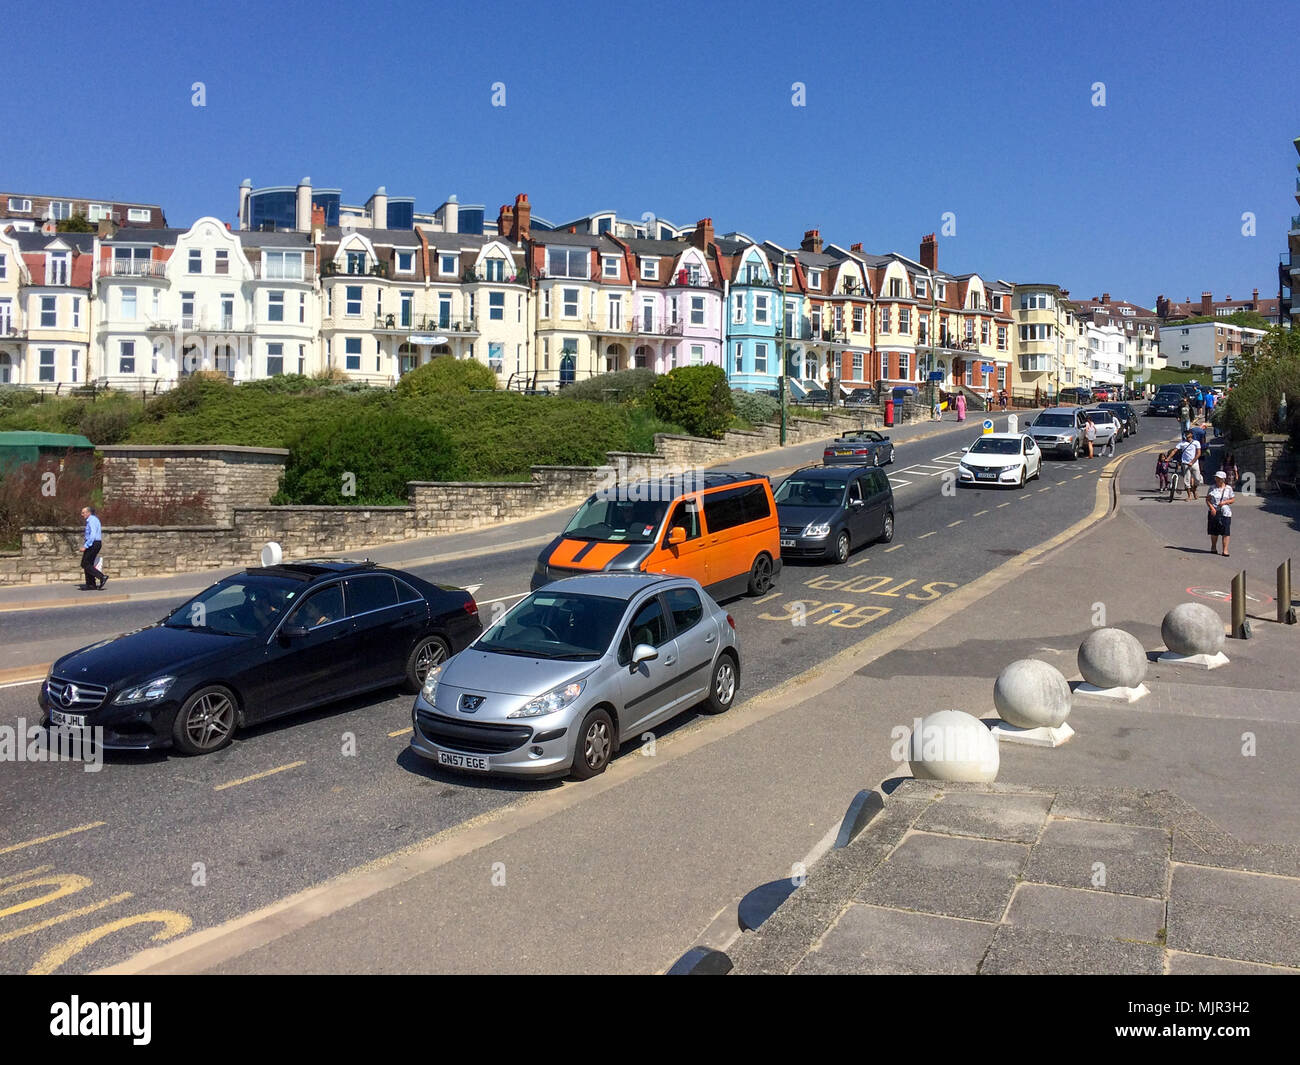 Boscombe, Bournemouth, Dorset, UK, 6th May 2018, Weather: Morning sunshine on the south coast on what could be the hottest Mayday bank holiday weekend on record. A woman relaxes on the beach next a calm sea. Credit: Paul Biggins/Alamy Live News Boscombe, Bournemouth, Dorset, UK, 6th May 2018, Weather: Queuing traffic in a heatwave on the south coast on what could be the hottest Mayday bank holiday weekend on record. Stock Photo